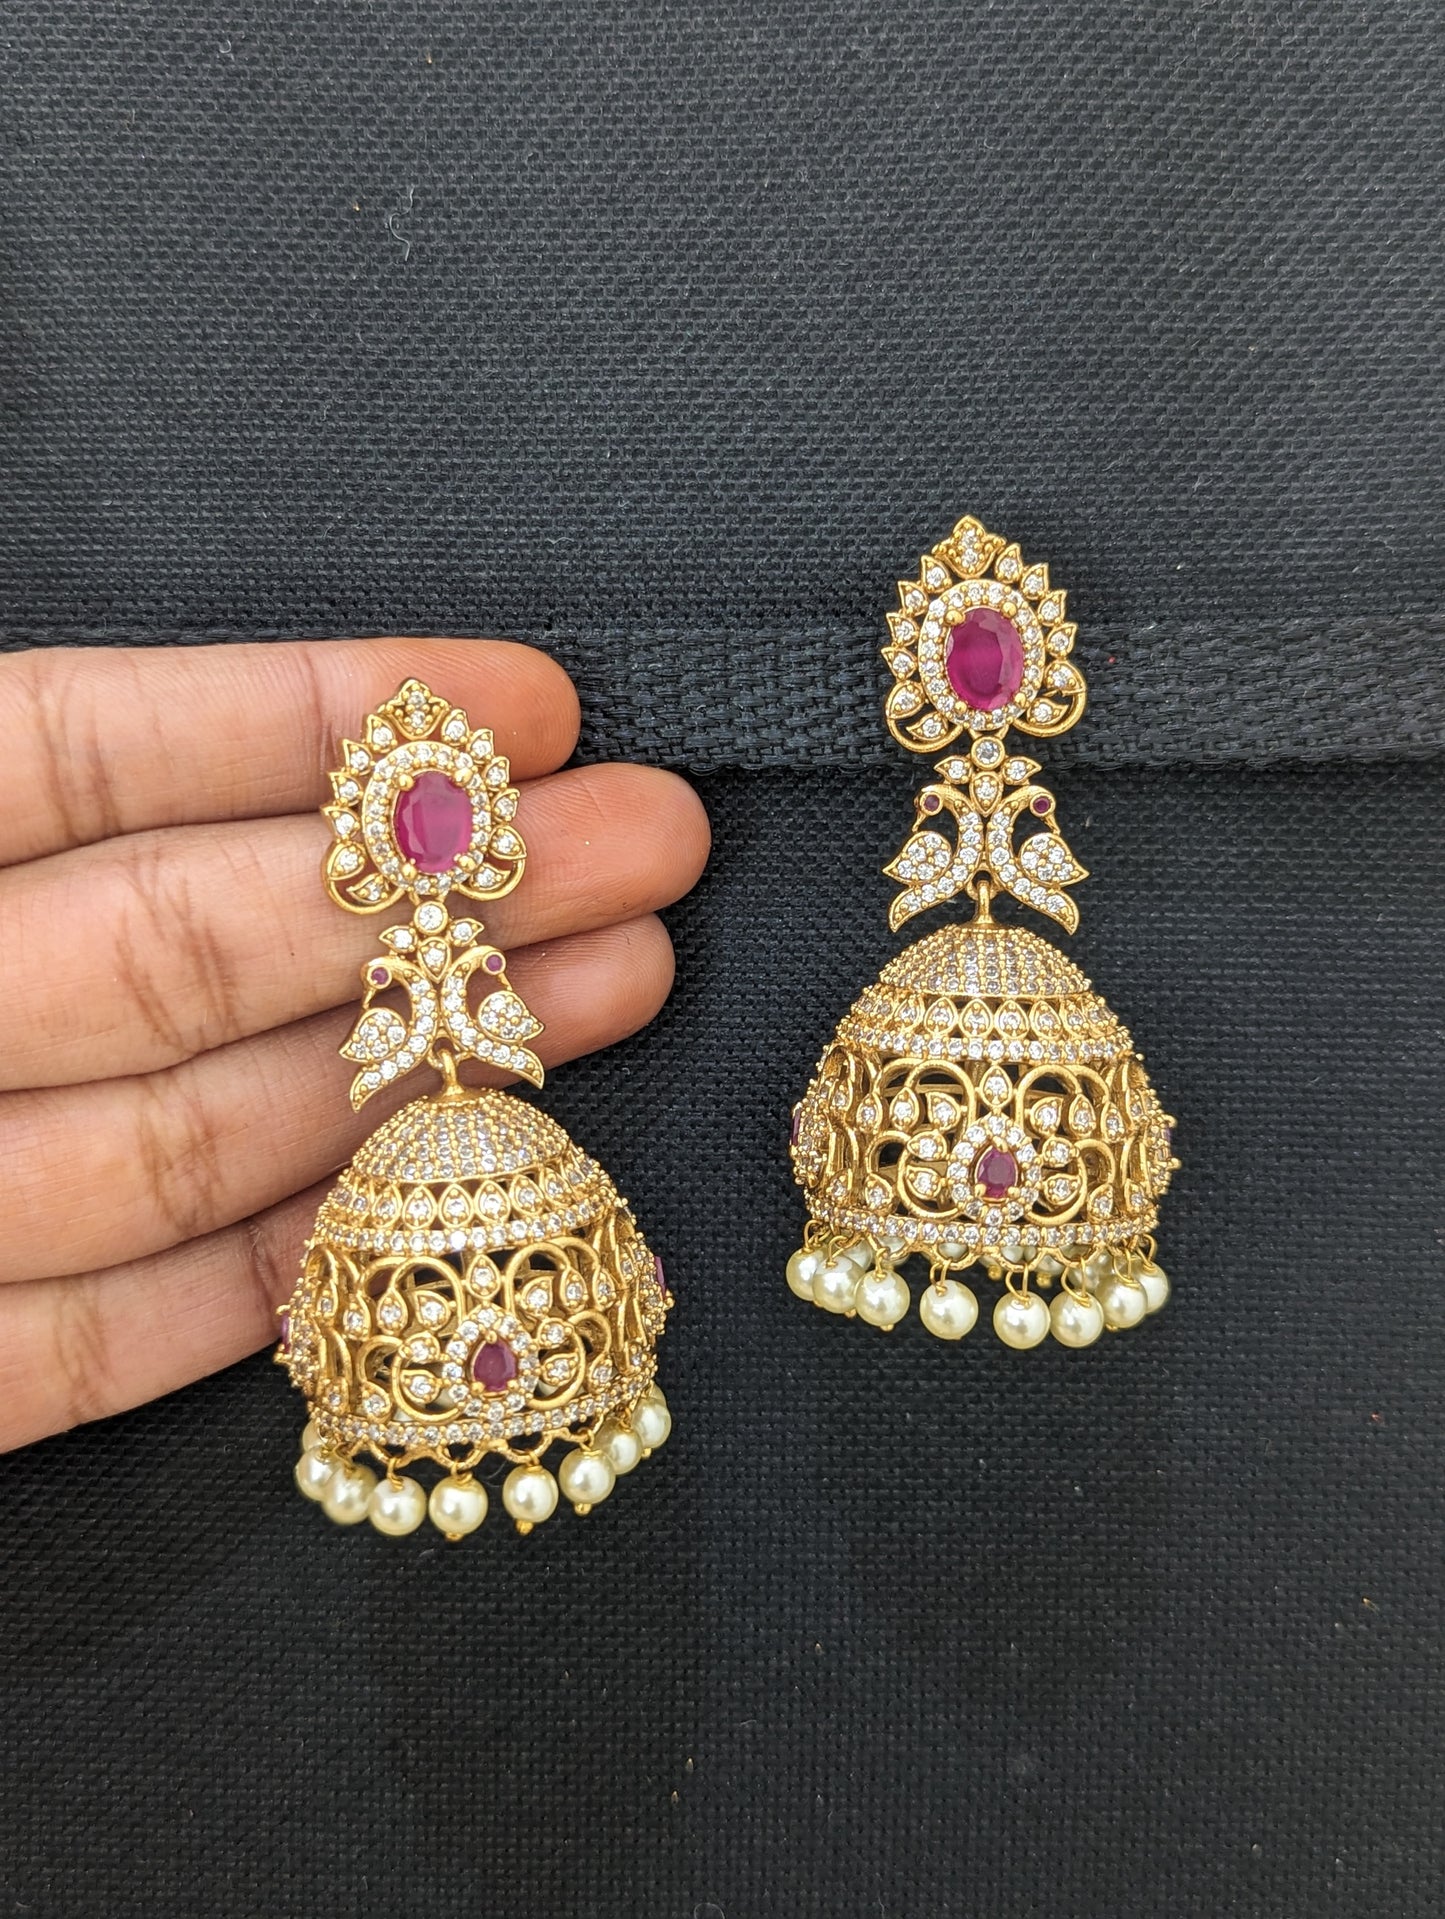 Antique Gold plated Peacock Large Jhumka Earrings